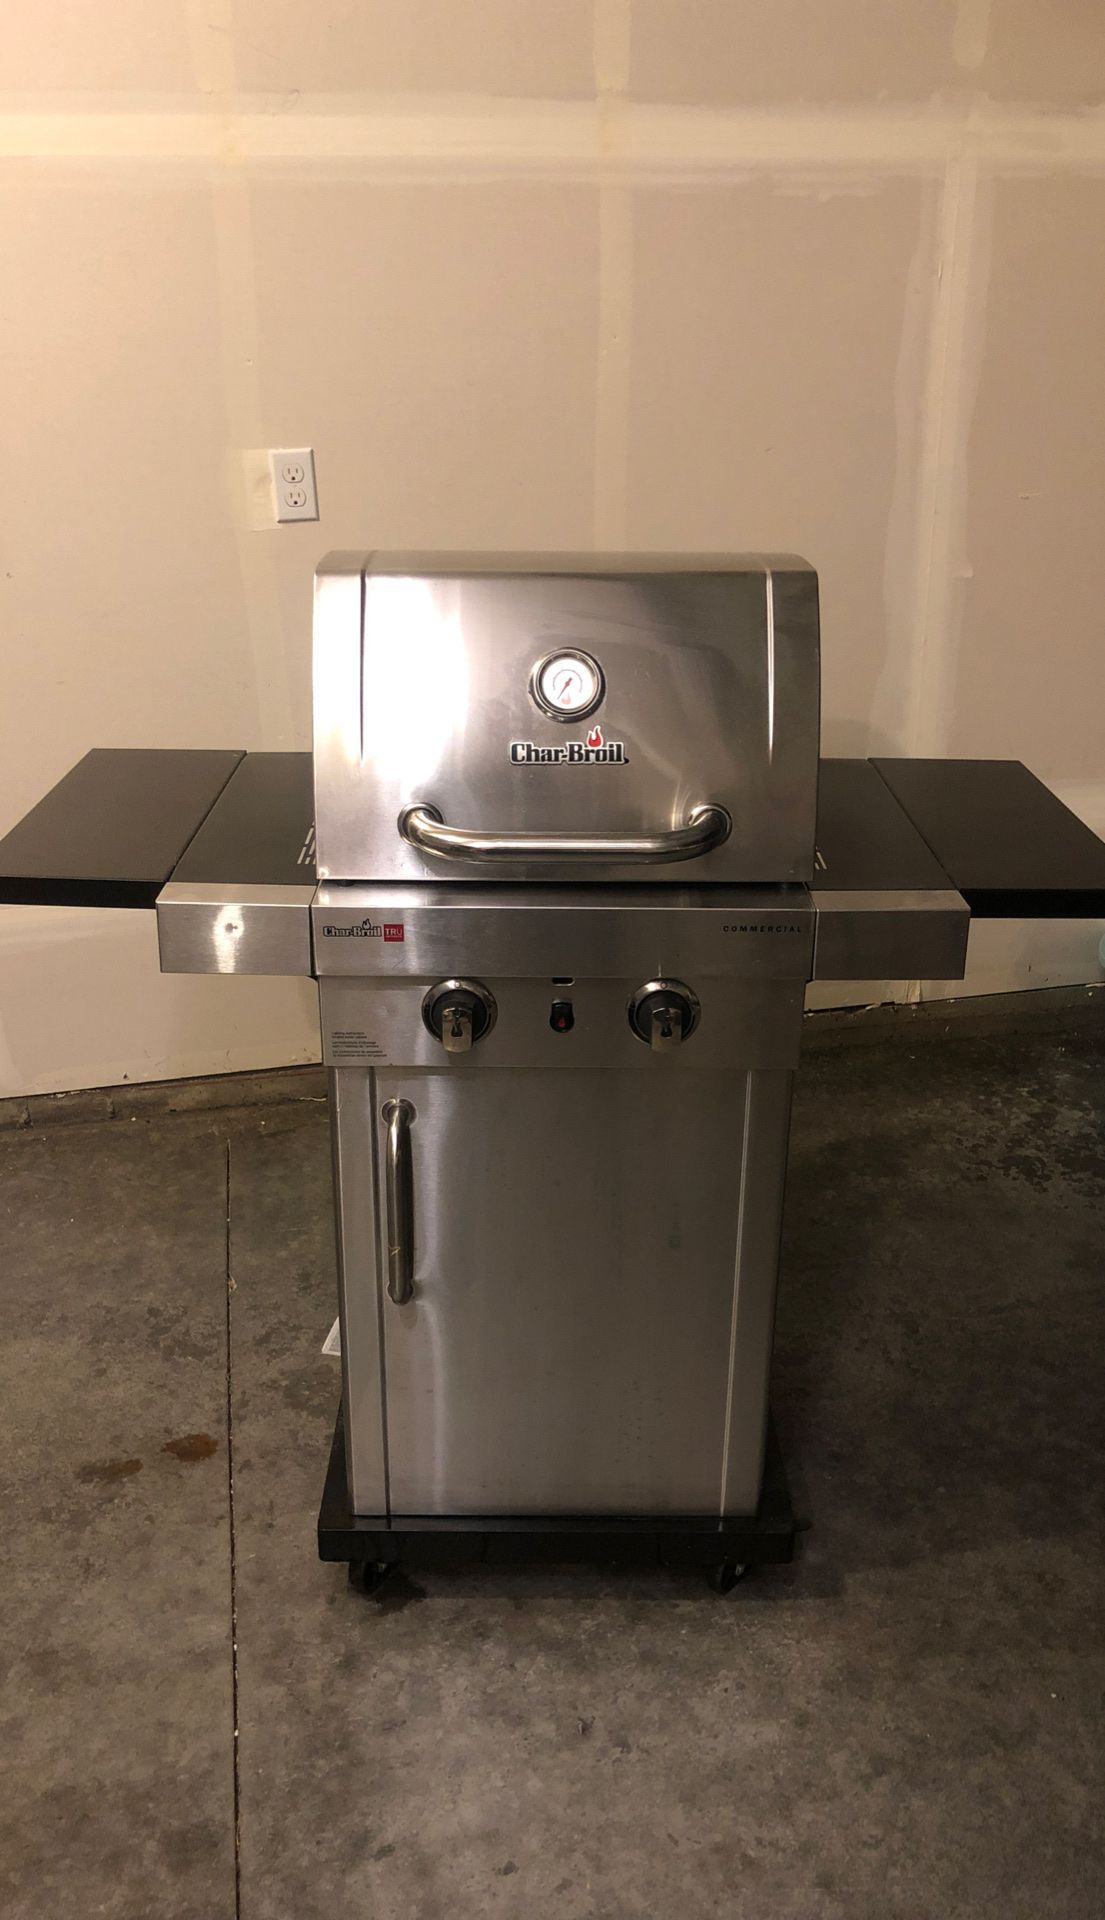 Charbroil commercial grill